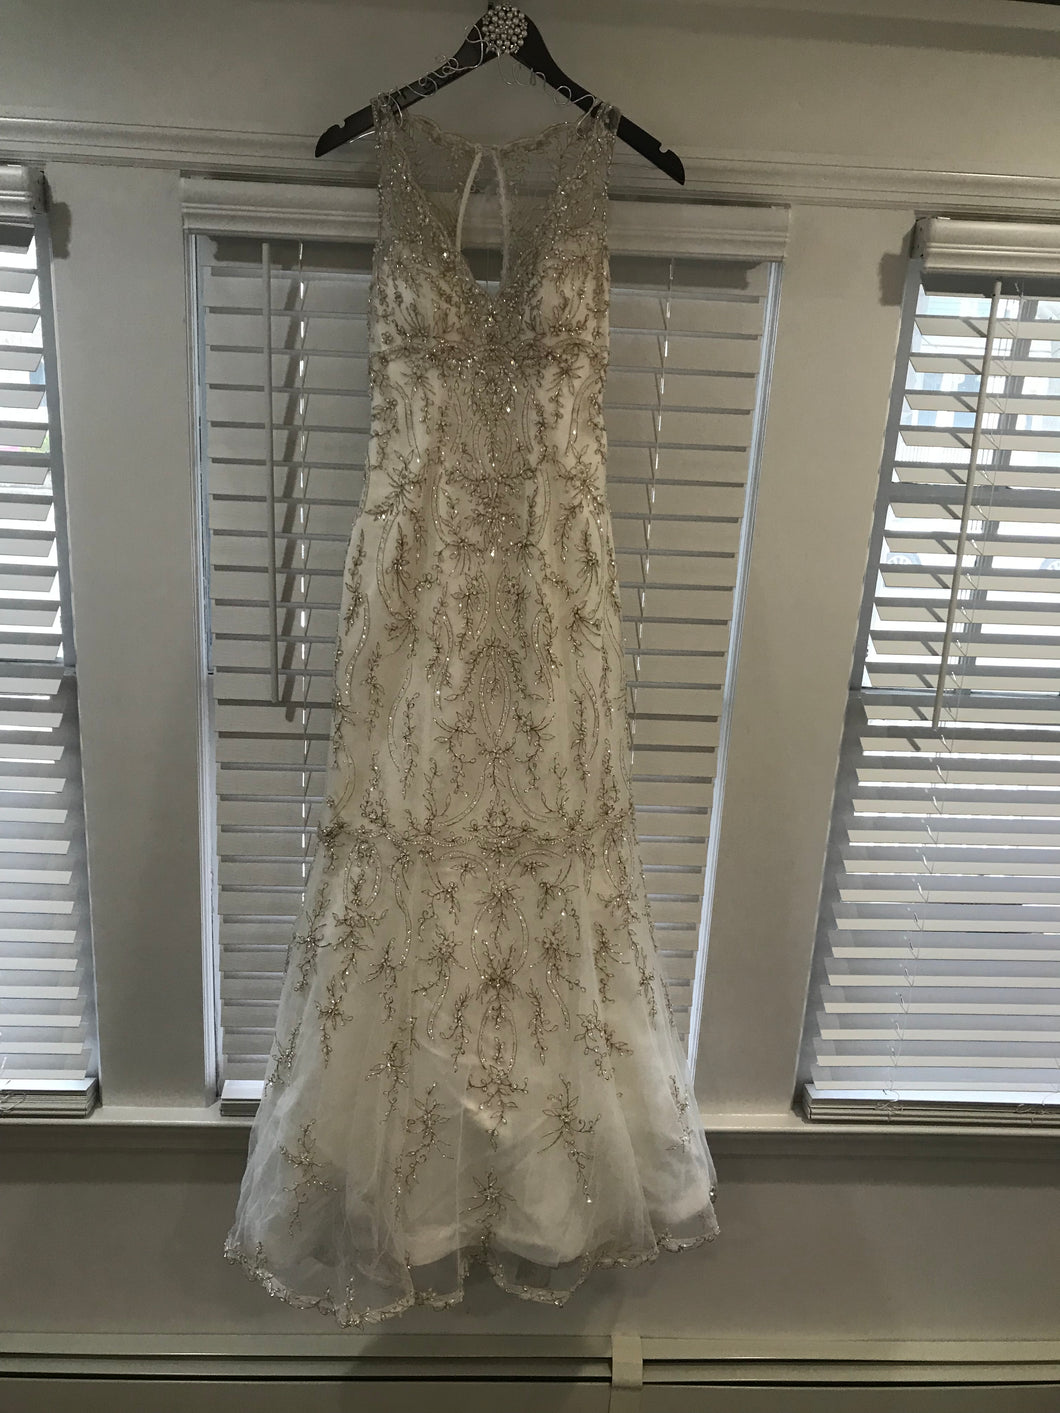 Maggie Sottero 'Blakely' size 2 used wedding dress front view on hanger